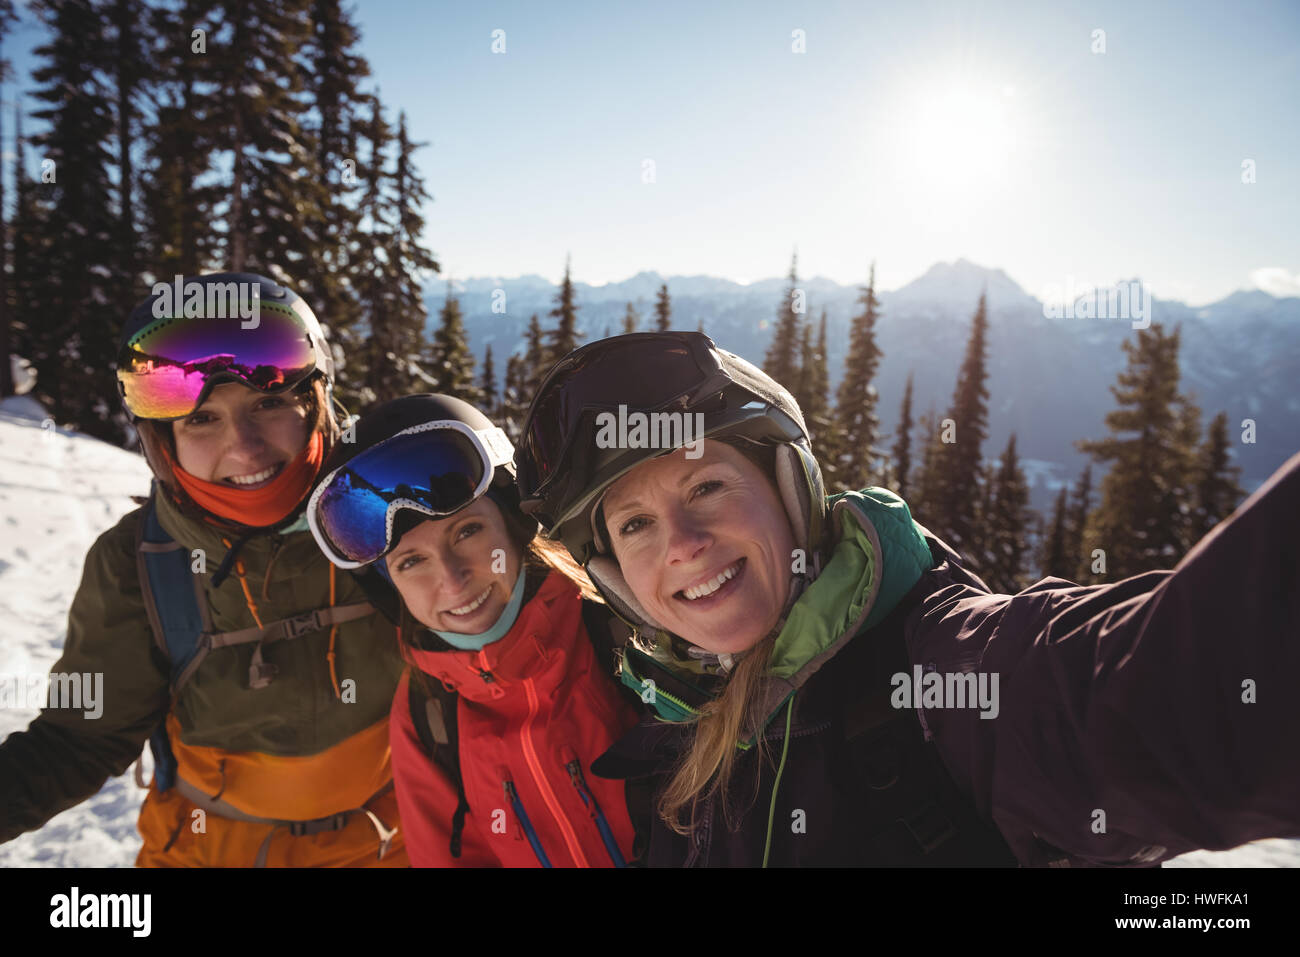 Portrait of three female skiers standing together on snow covered mountain Stock Photo